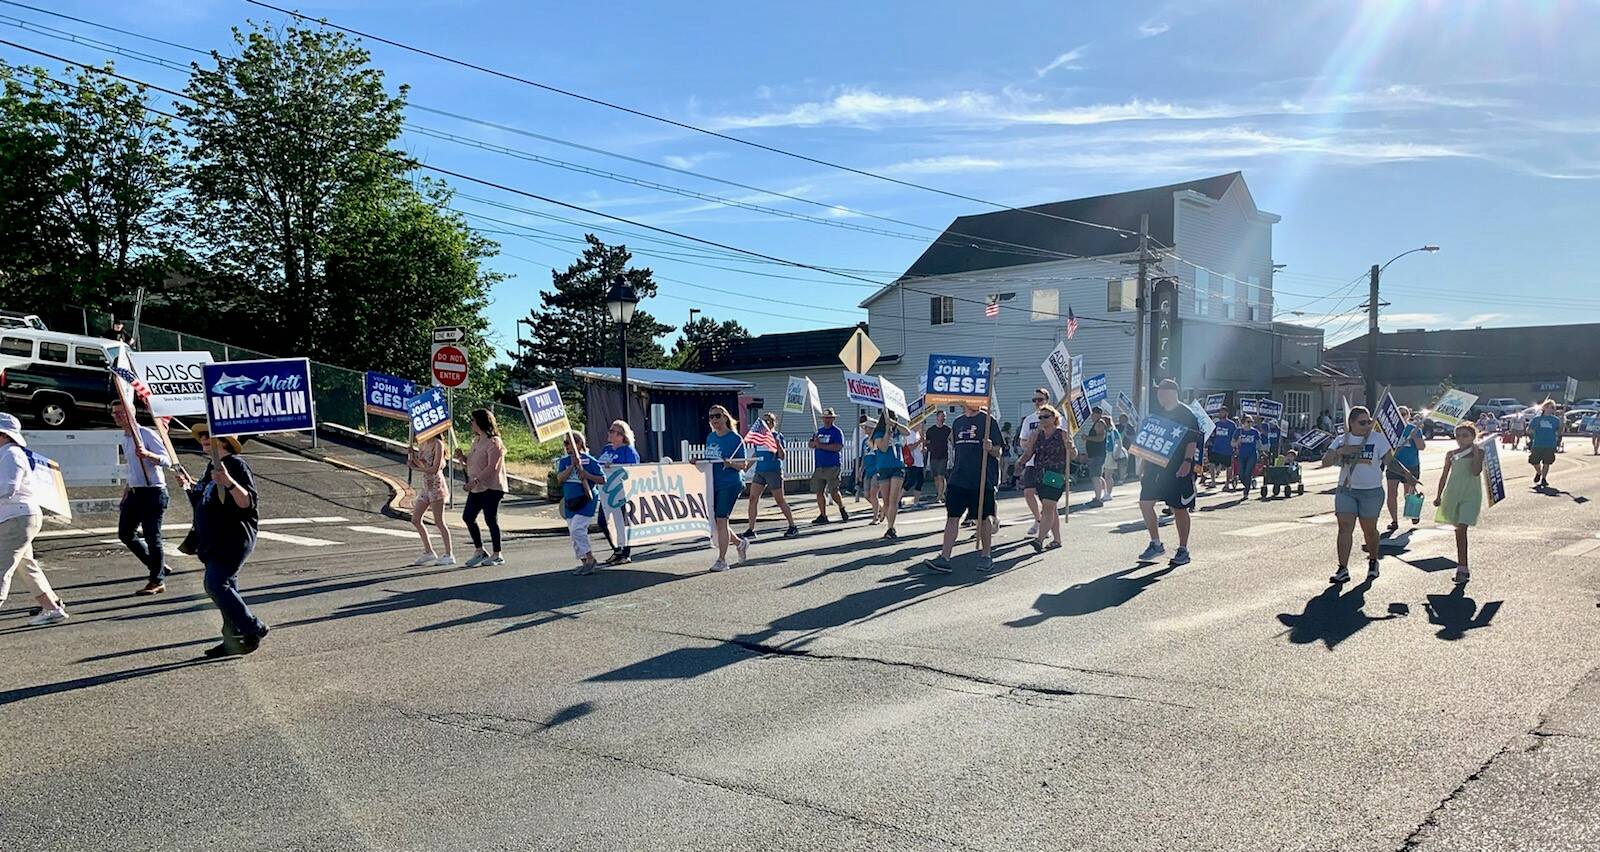 Supporters of political candidates gather together to march in the Fathoms O’ Fun Grand Parade in Port Orchard on June 25. (Bob Smith | Kitsap News Group)